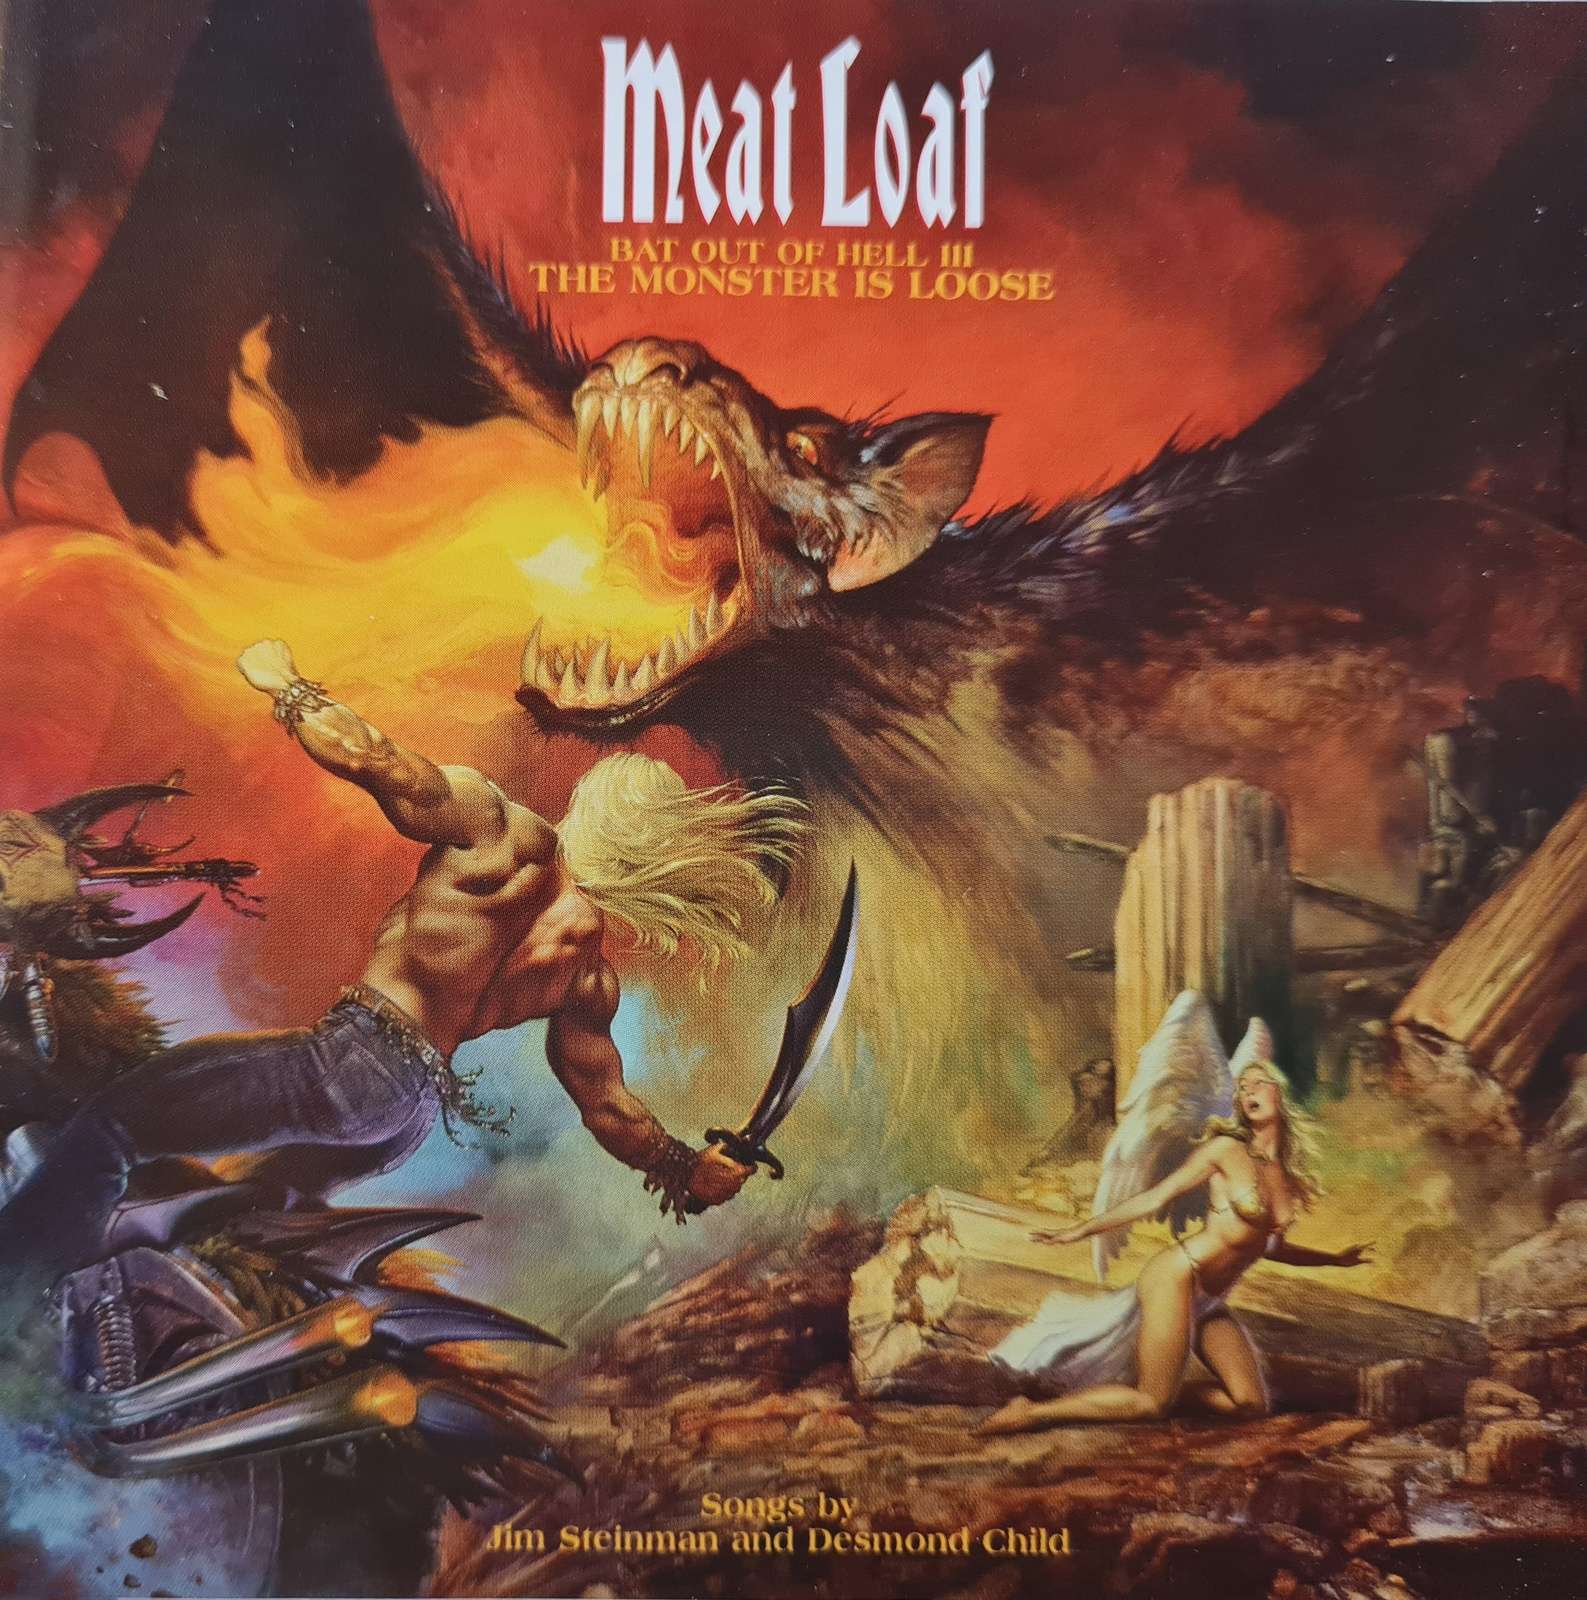 Meat Loaf - Bat Out of Hell III The Monster is Loose (CD)